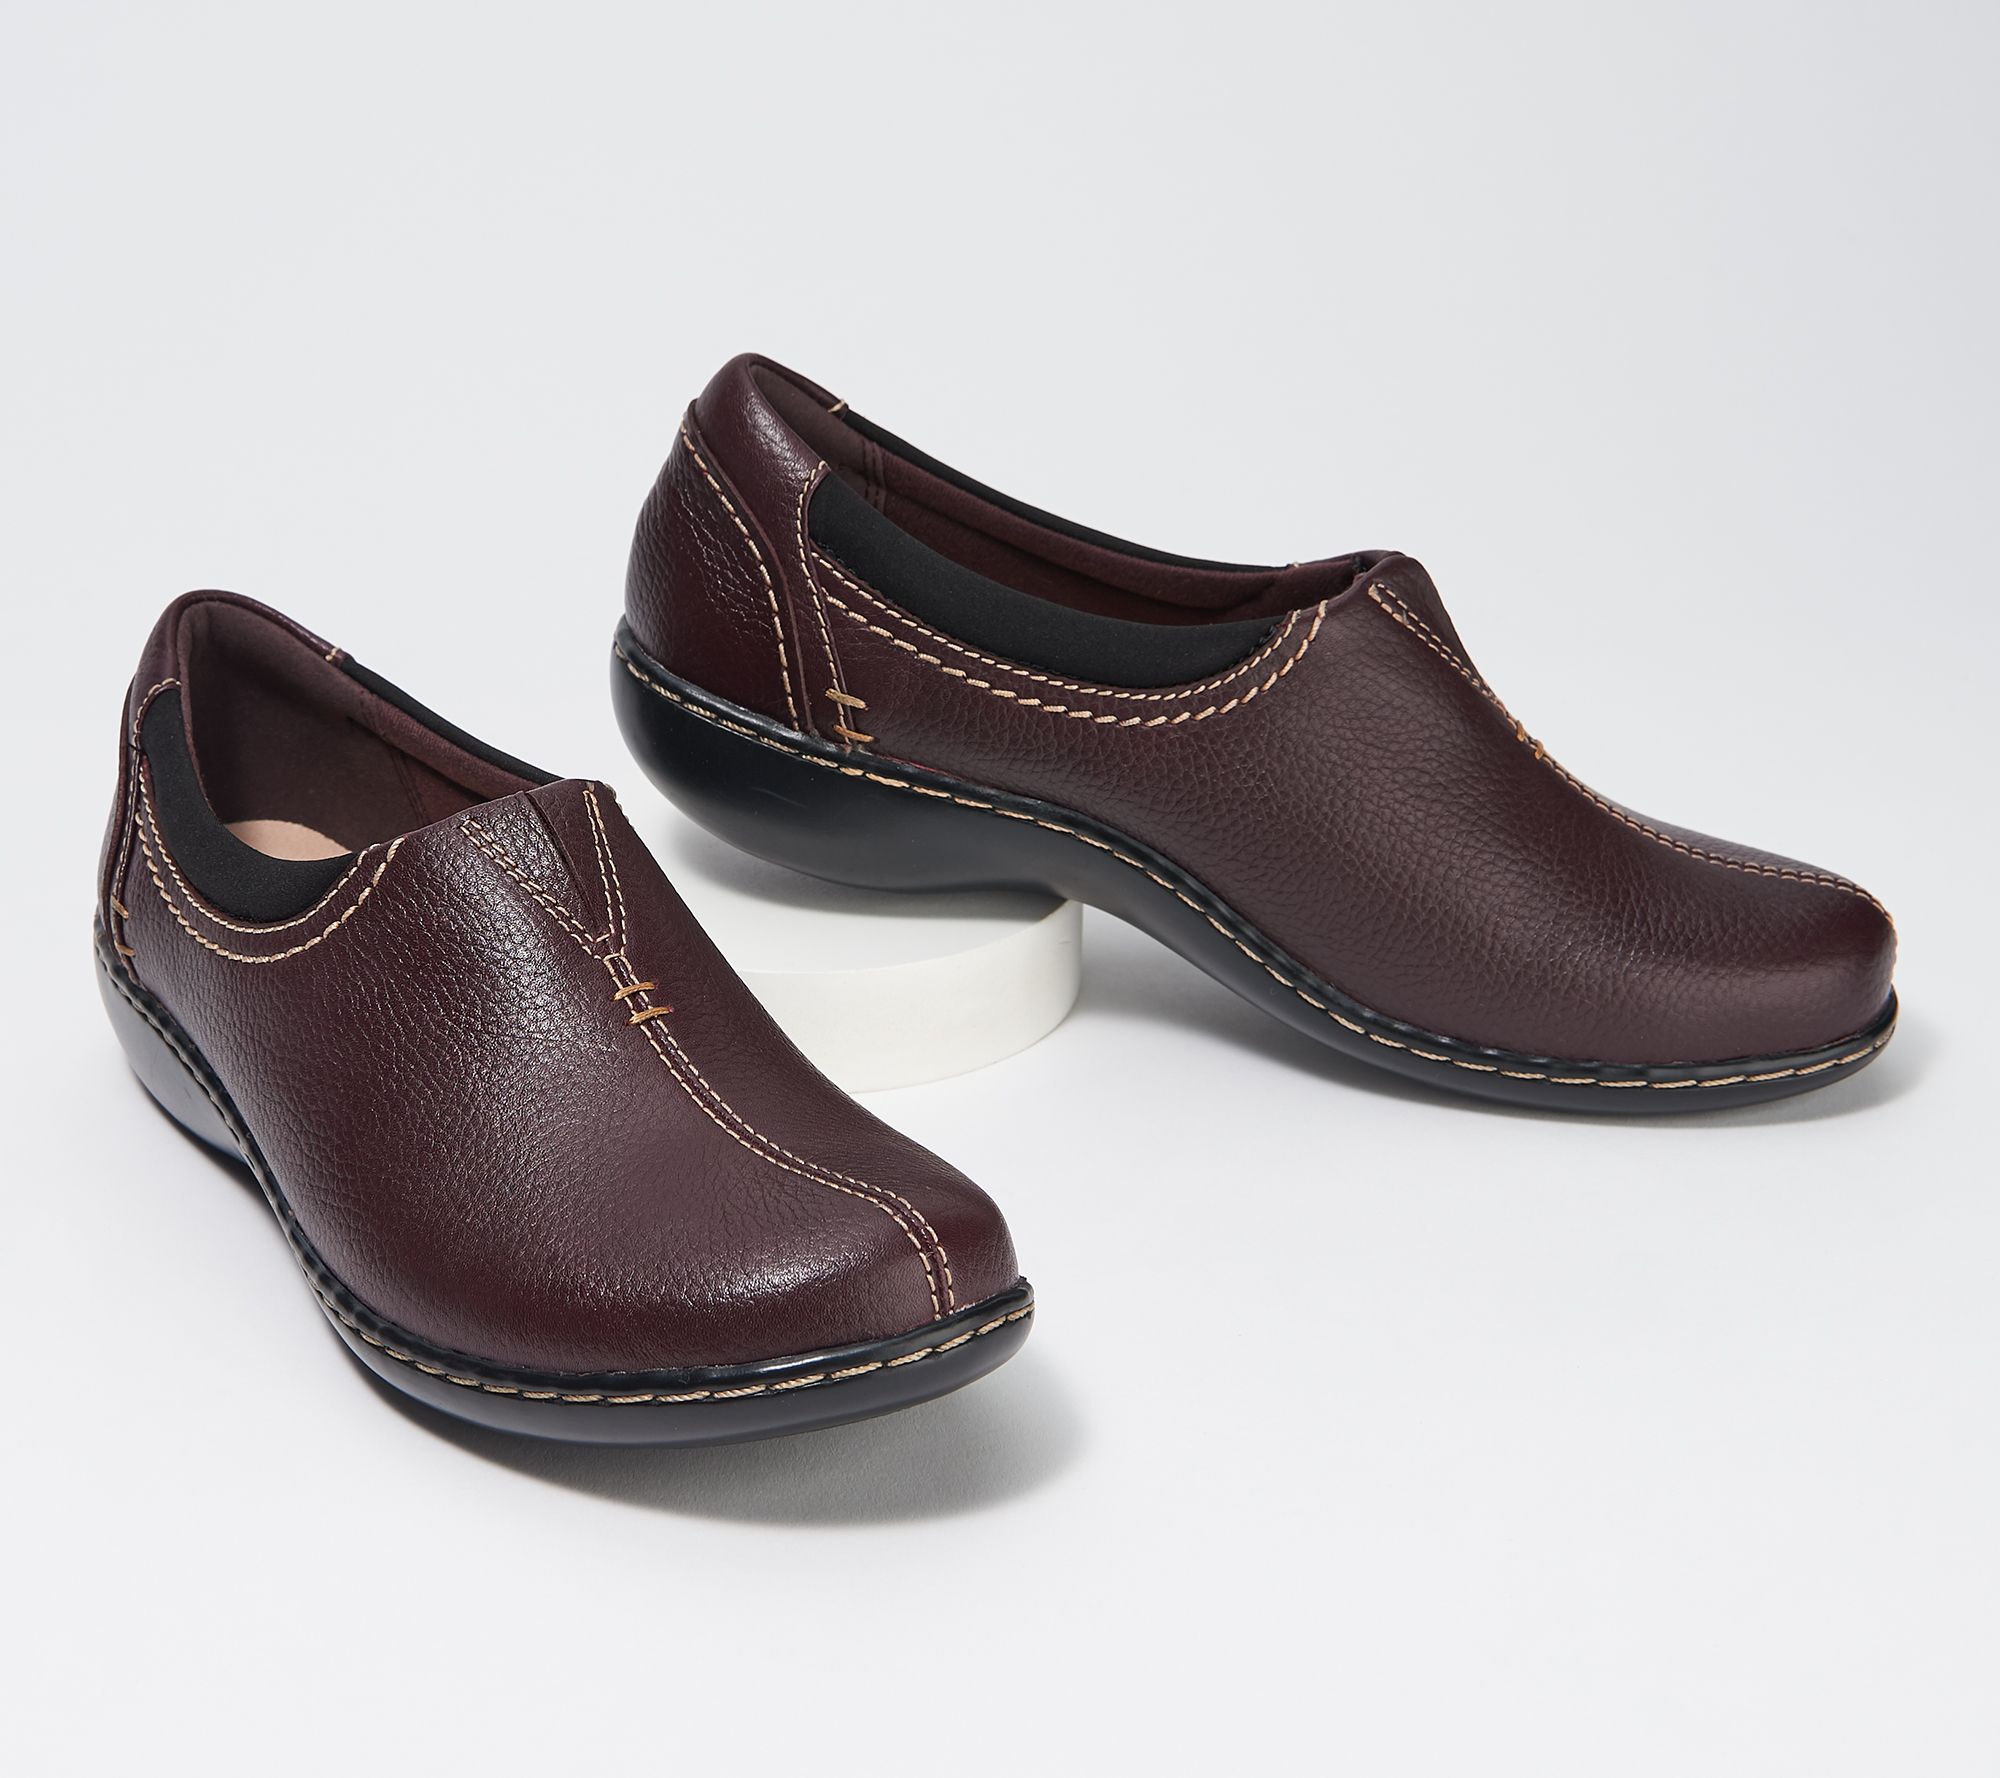 clarks at qvc